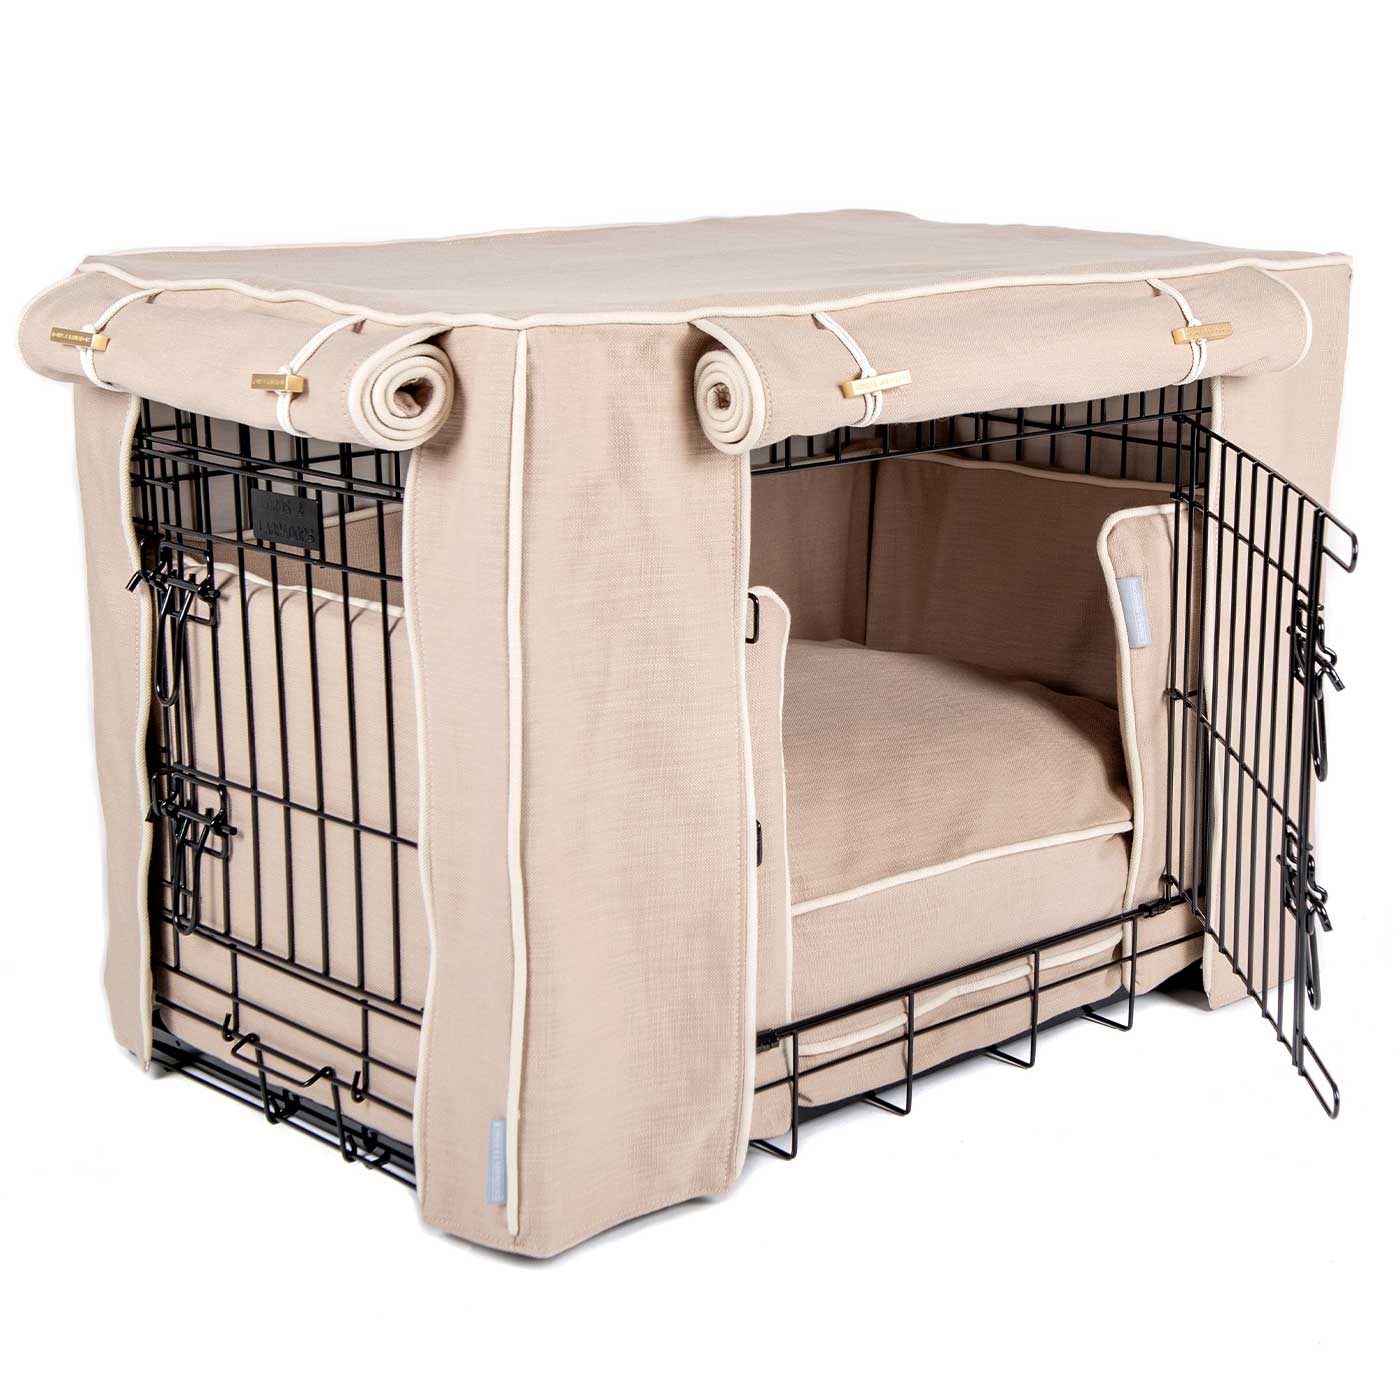 Dog Crate Set in Savanna Oatmeal by Lords & Labradors